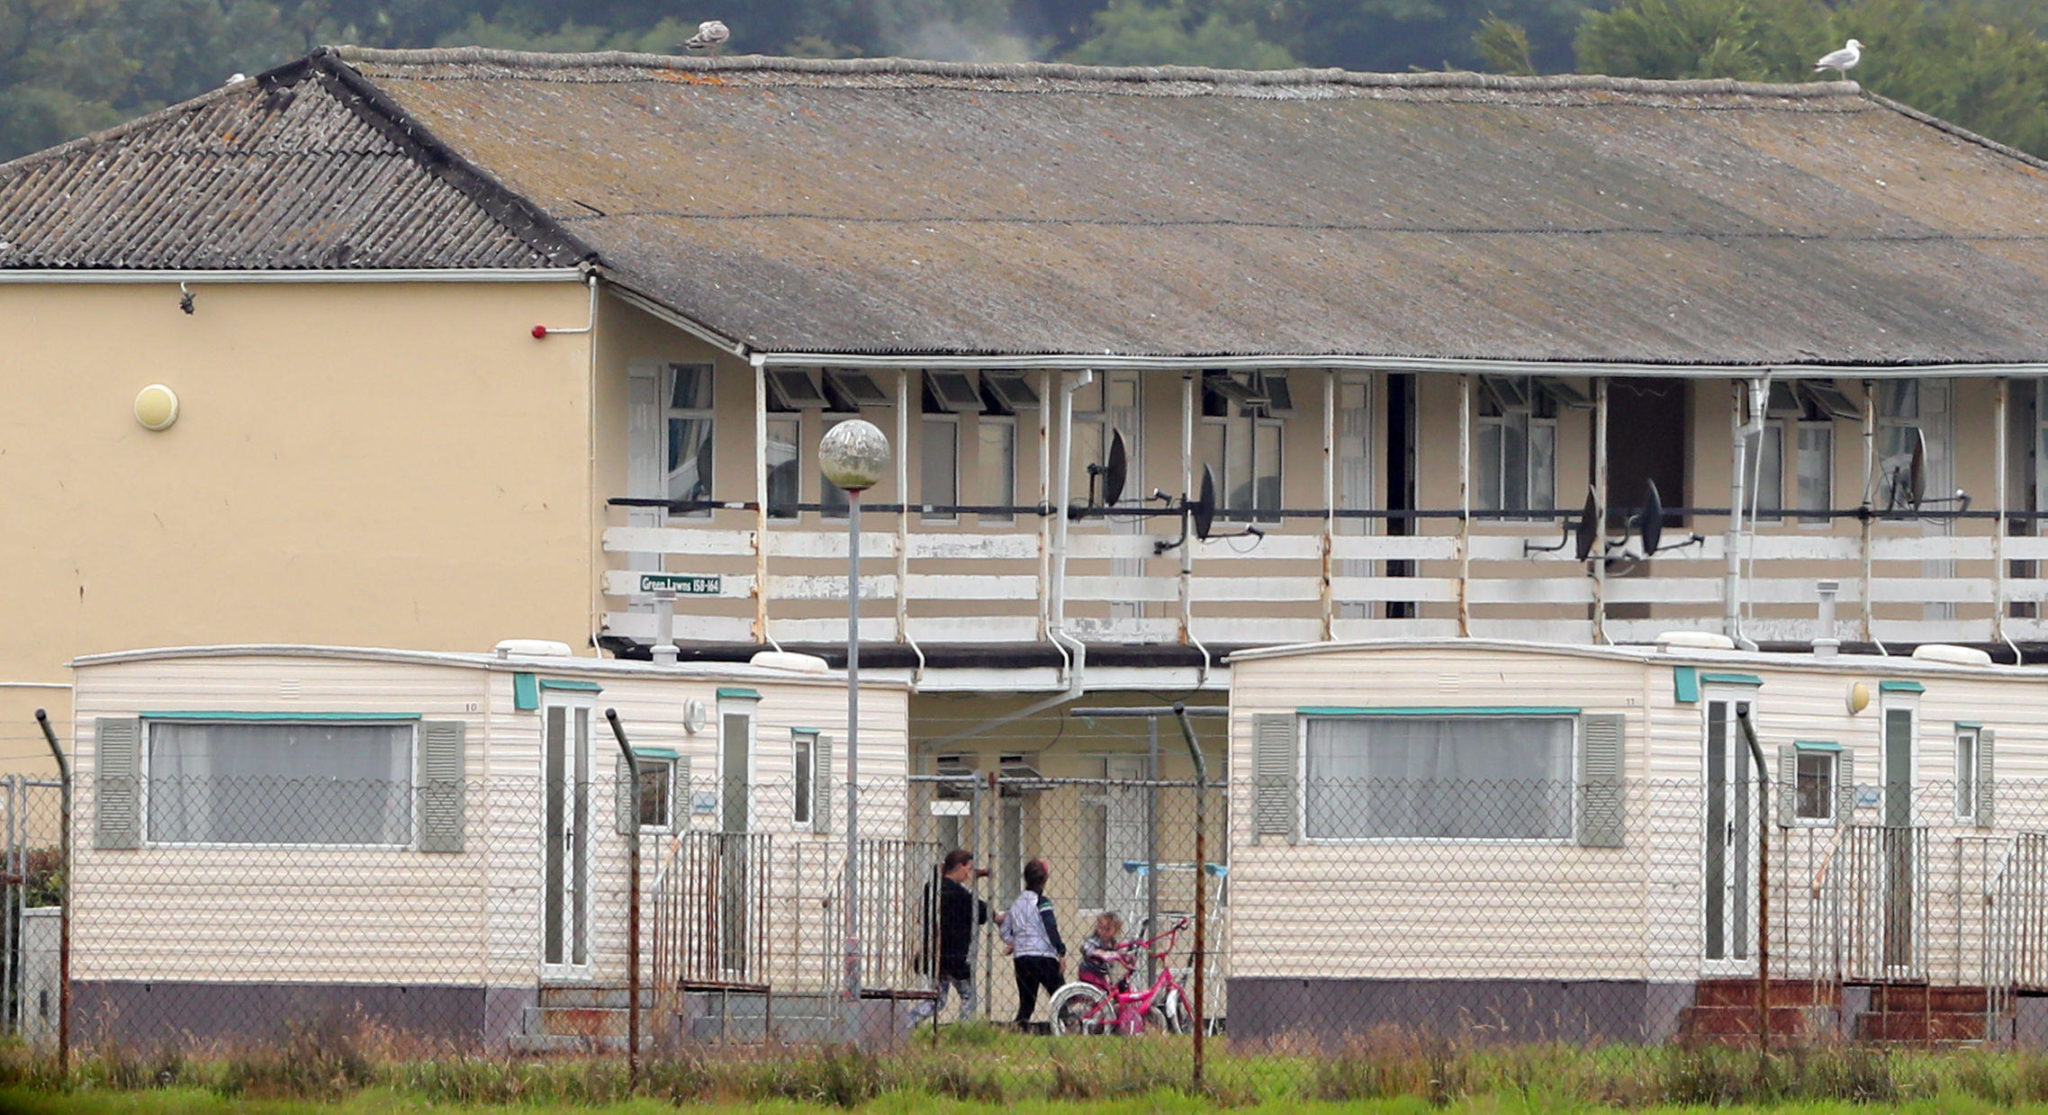 A general view of the Mosney Direct Provision centre in County Meath which houses asylum seekers as they await decisions on their refugee status, 19-07-2017. Image: Niall Carson/PA Wire